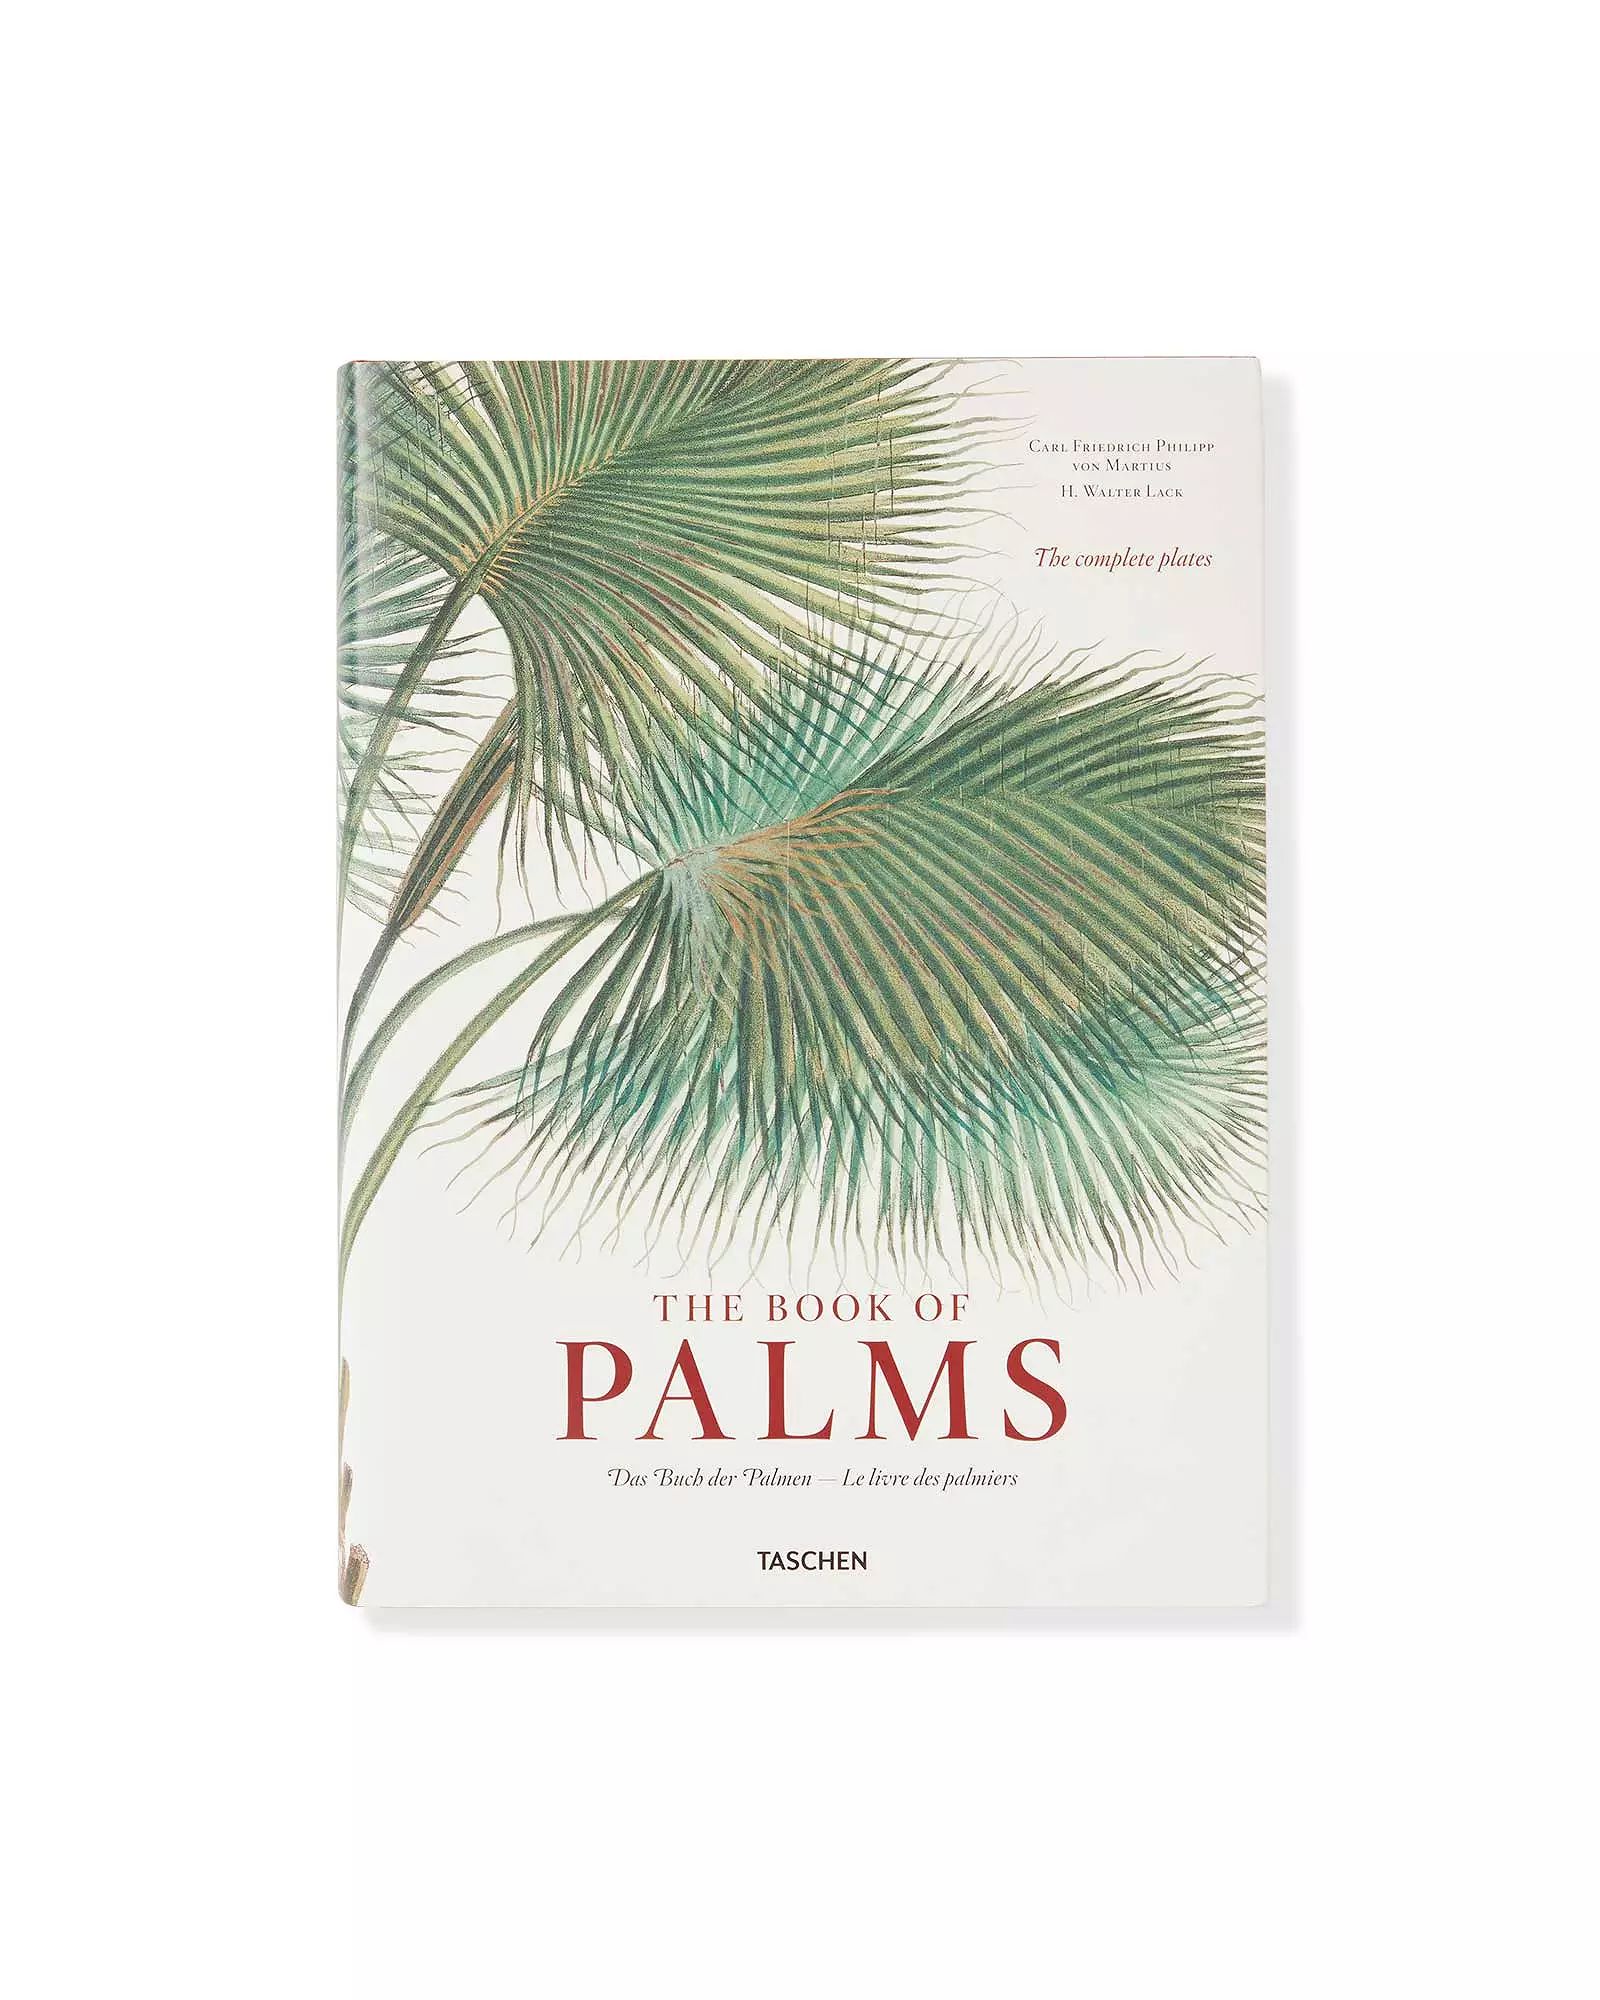 "The Book of Palms" by H. Walter Lack | Serena and Lily